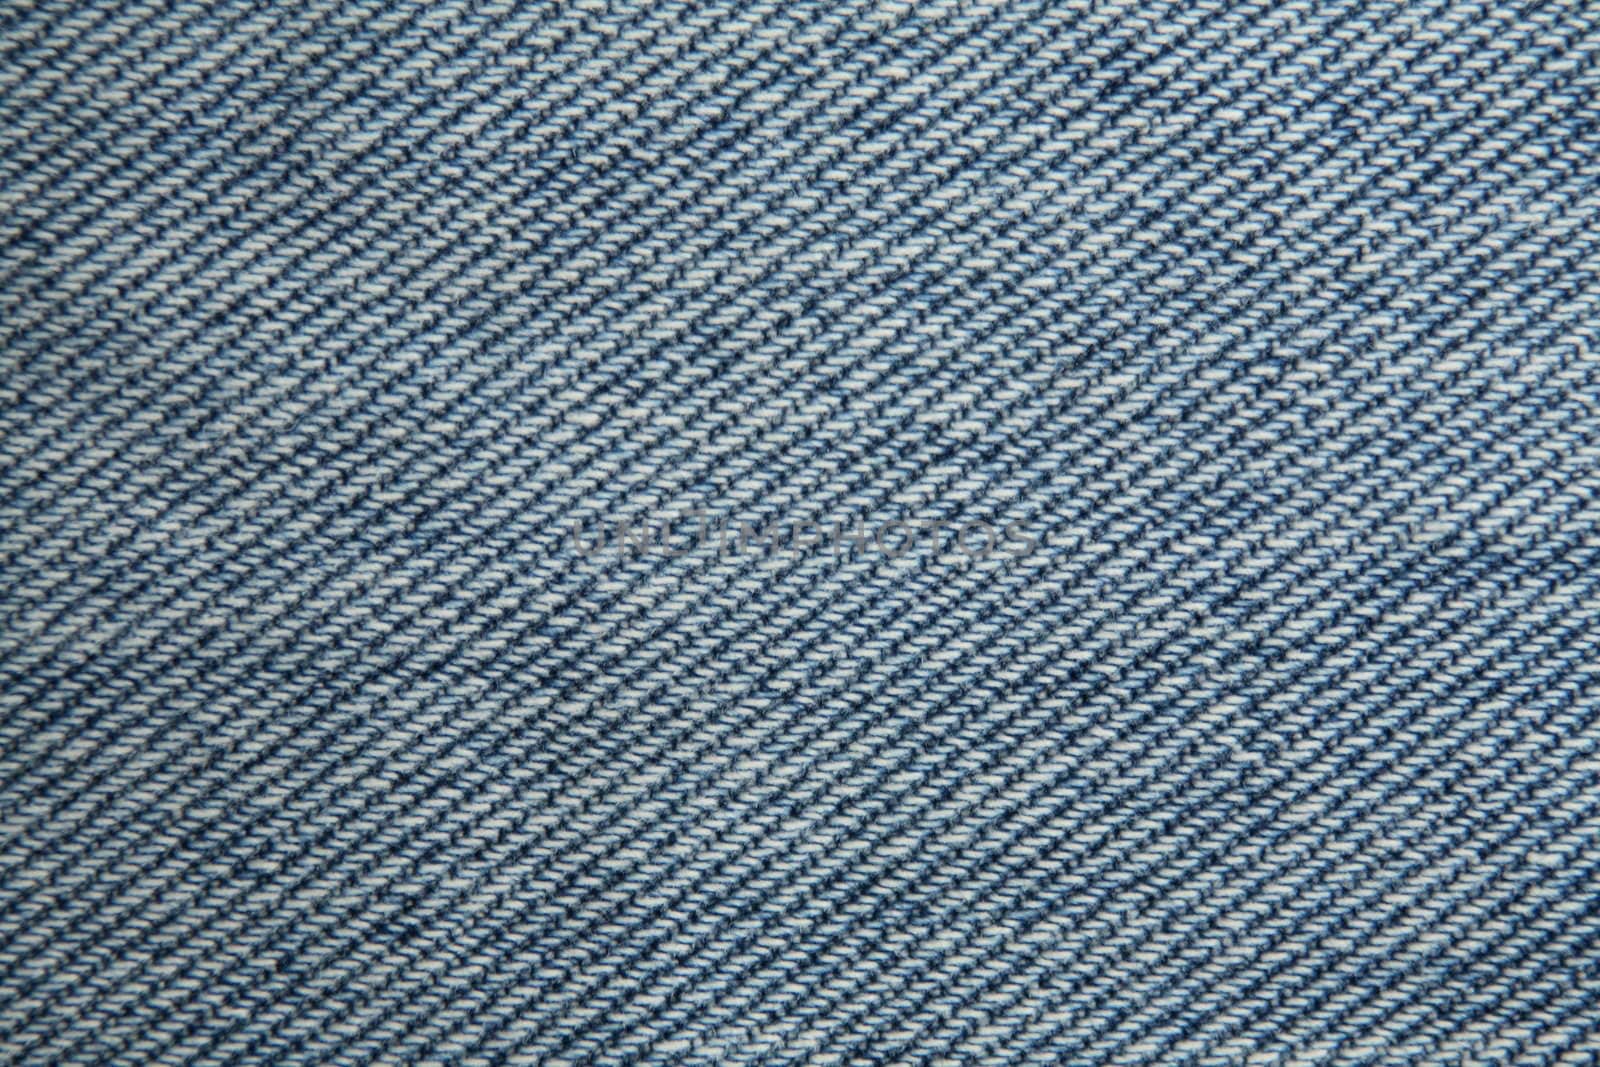 A close up photo of the jeans texture.